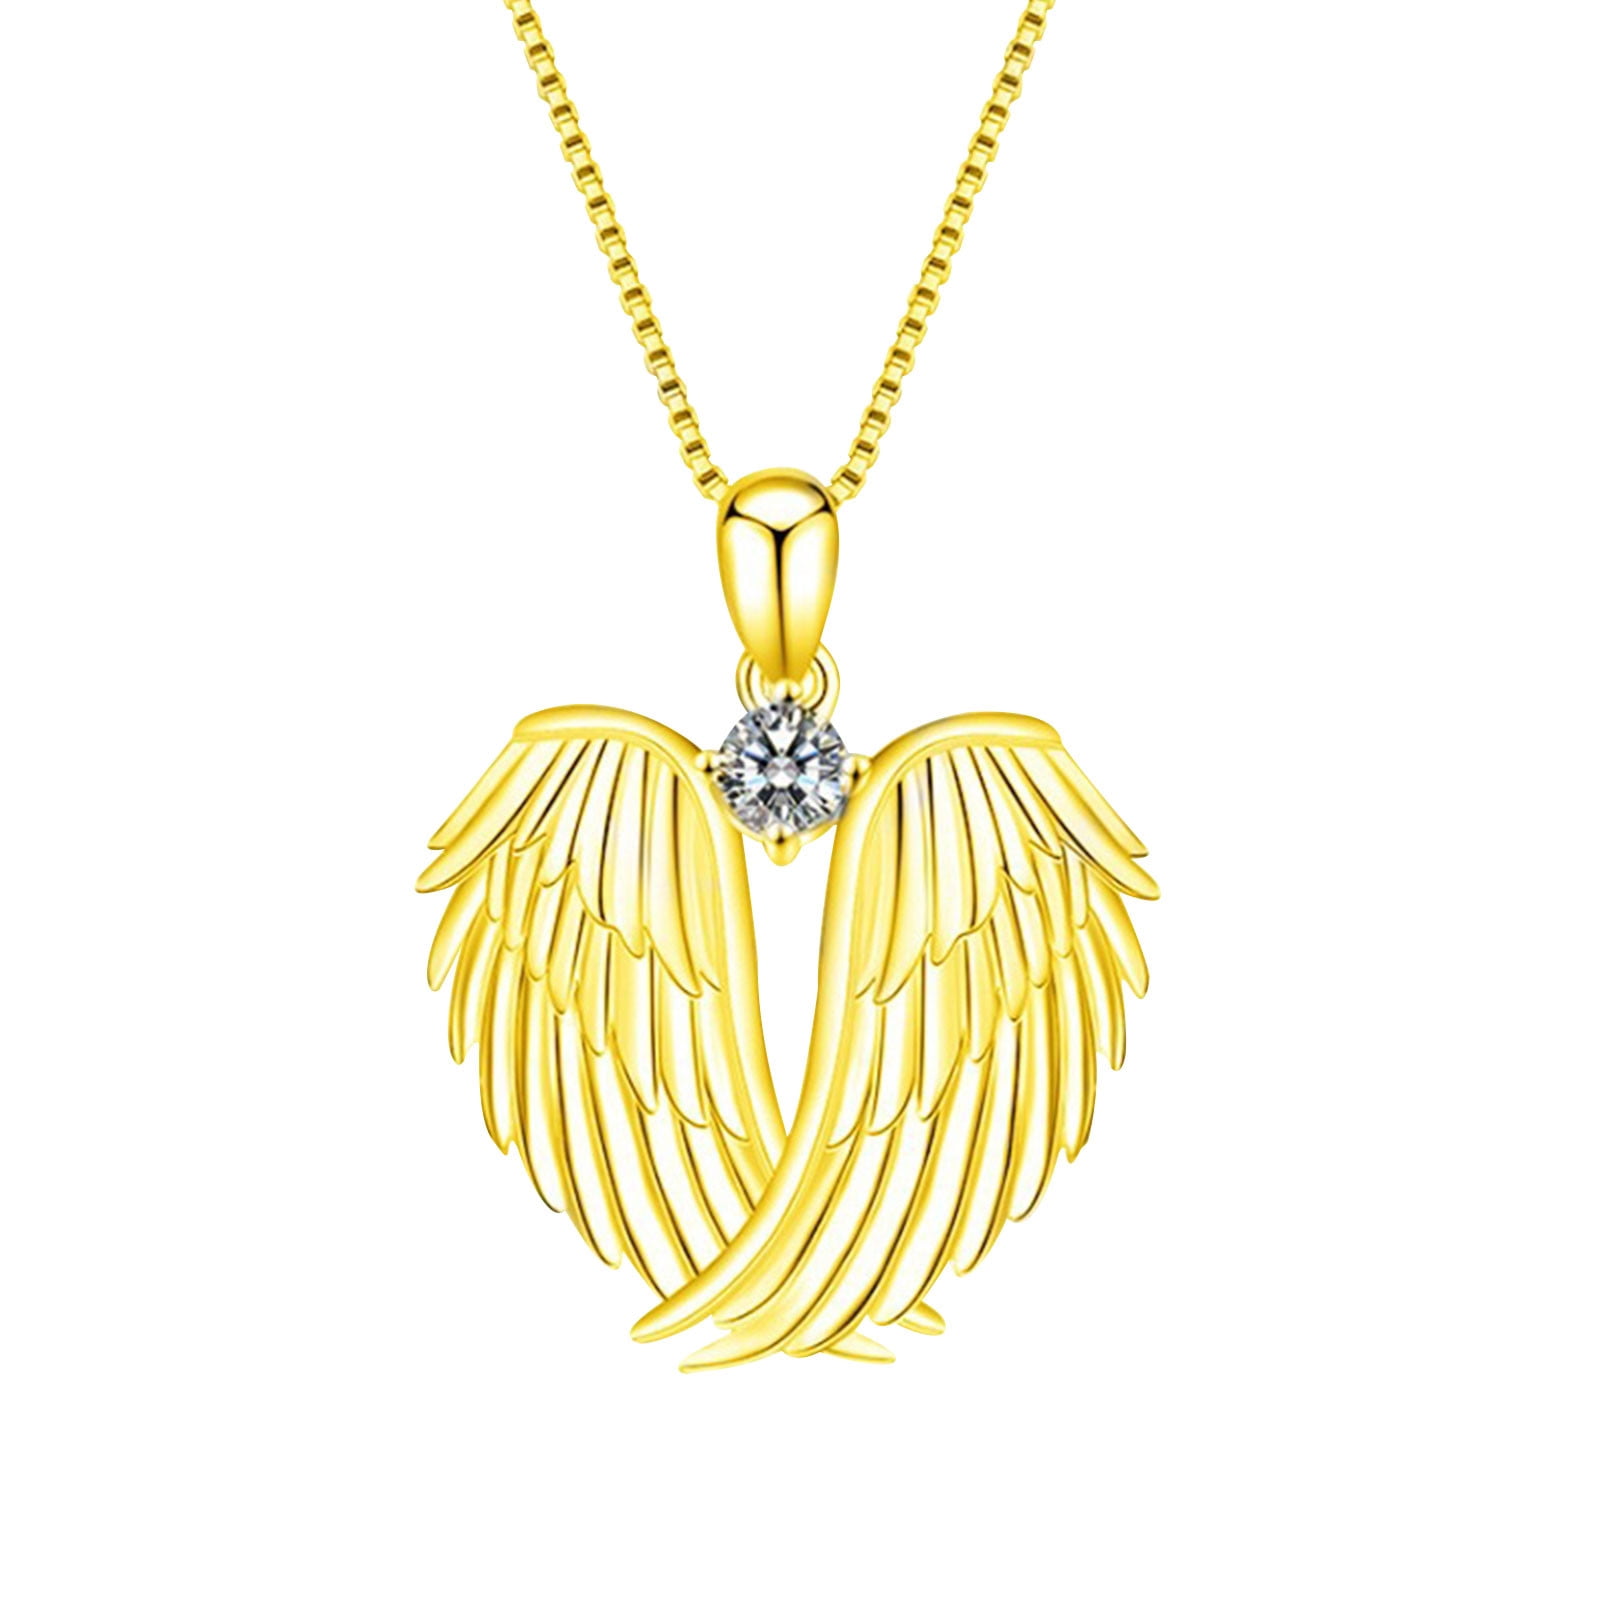 TIHLMK Deals Clearance Friendship Necklace Angel-Wings Necklace